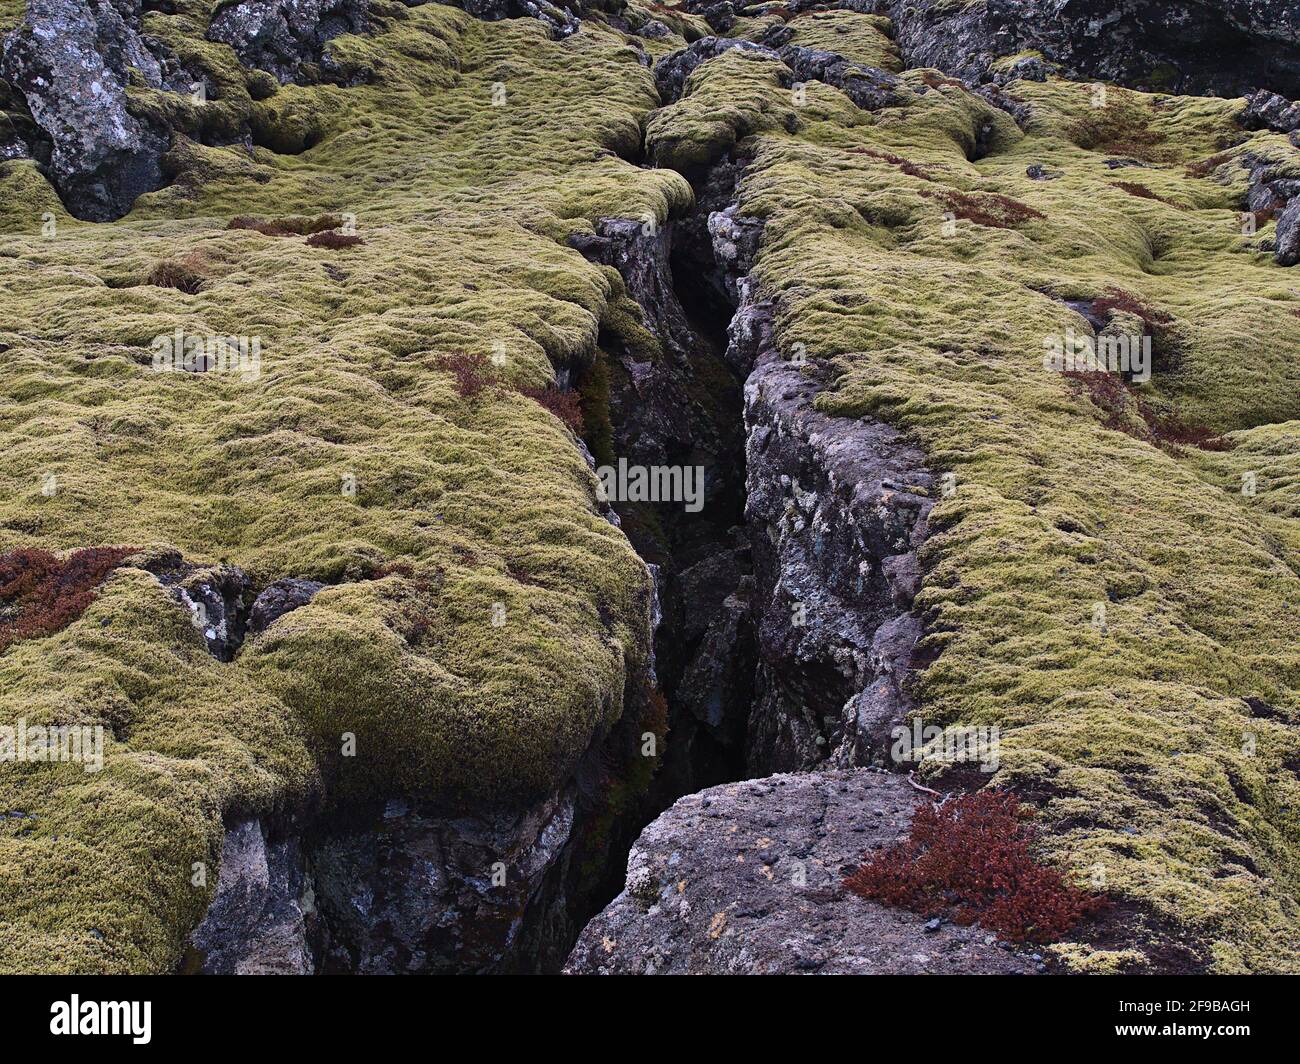 Closeup view of deep fissure on rocky volcanic lava field covered by green moss near Grindavik, Reykjanes peninsula, Iceland on cloudy winter day. Stock Photo